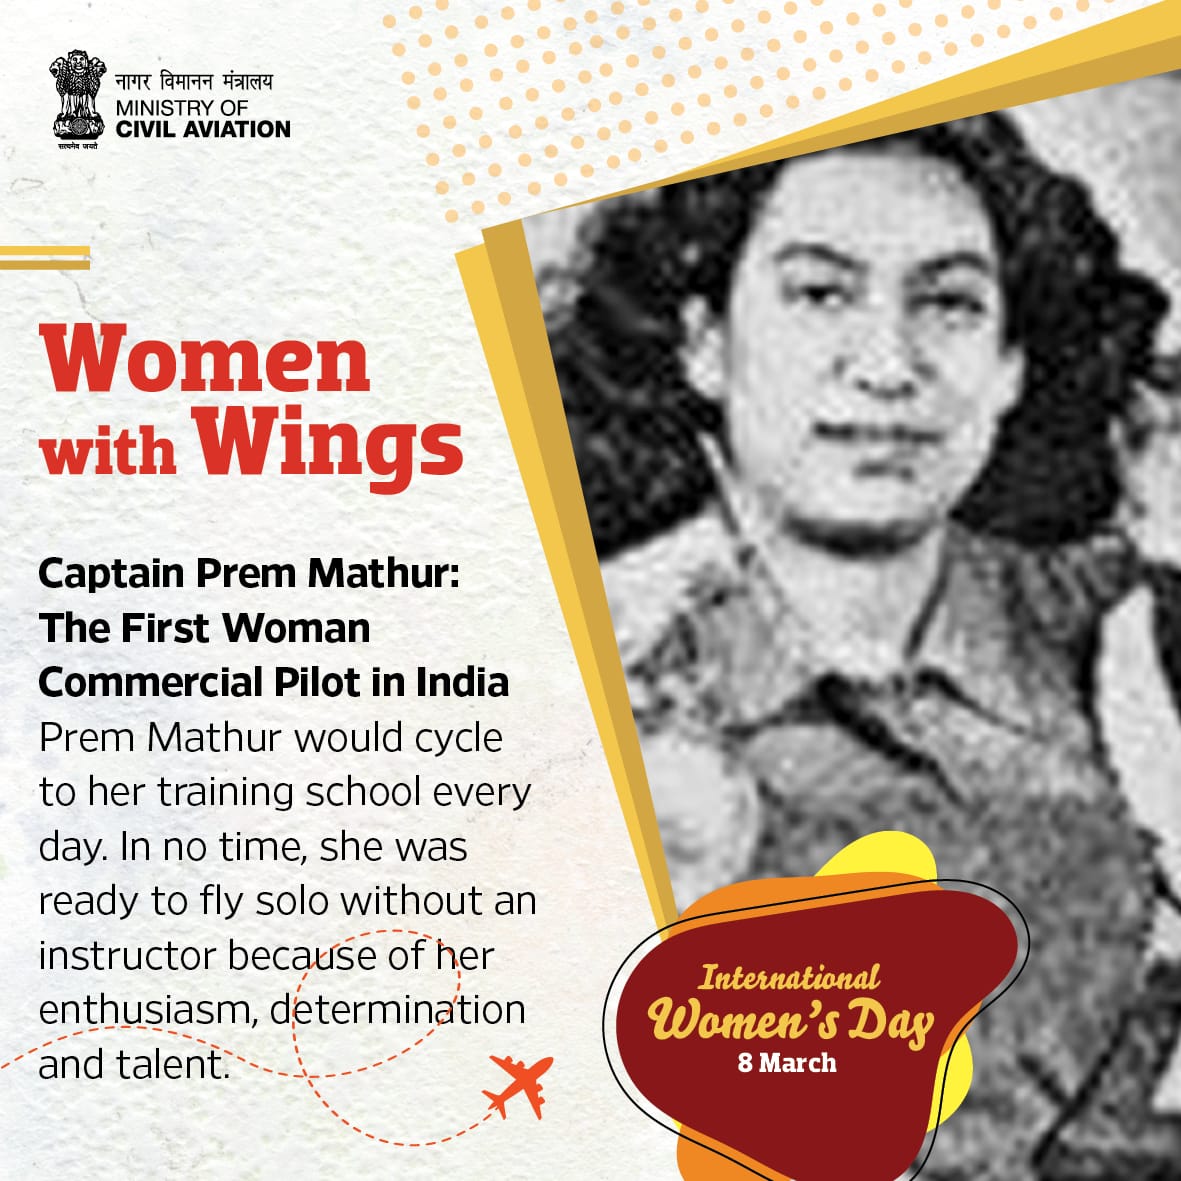 Prem Mathur is the first Indian woman commercial pilot and started flying for Deccan Airways. She obtained her commercial pilot's licence in 1947. In 1949, she won the National Air Race.